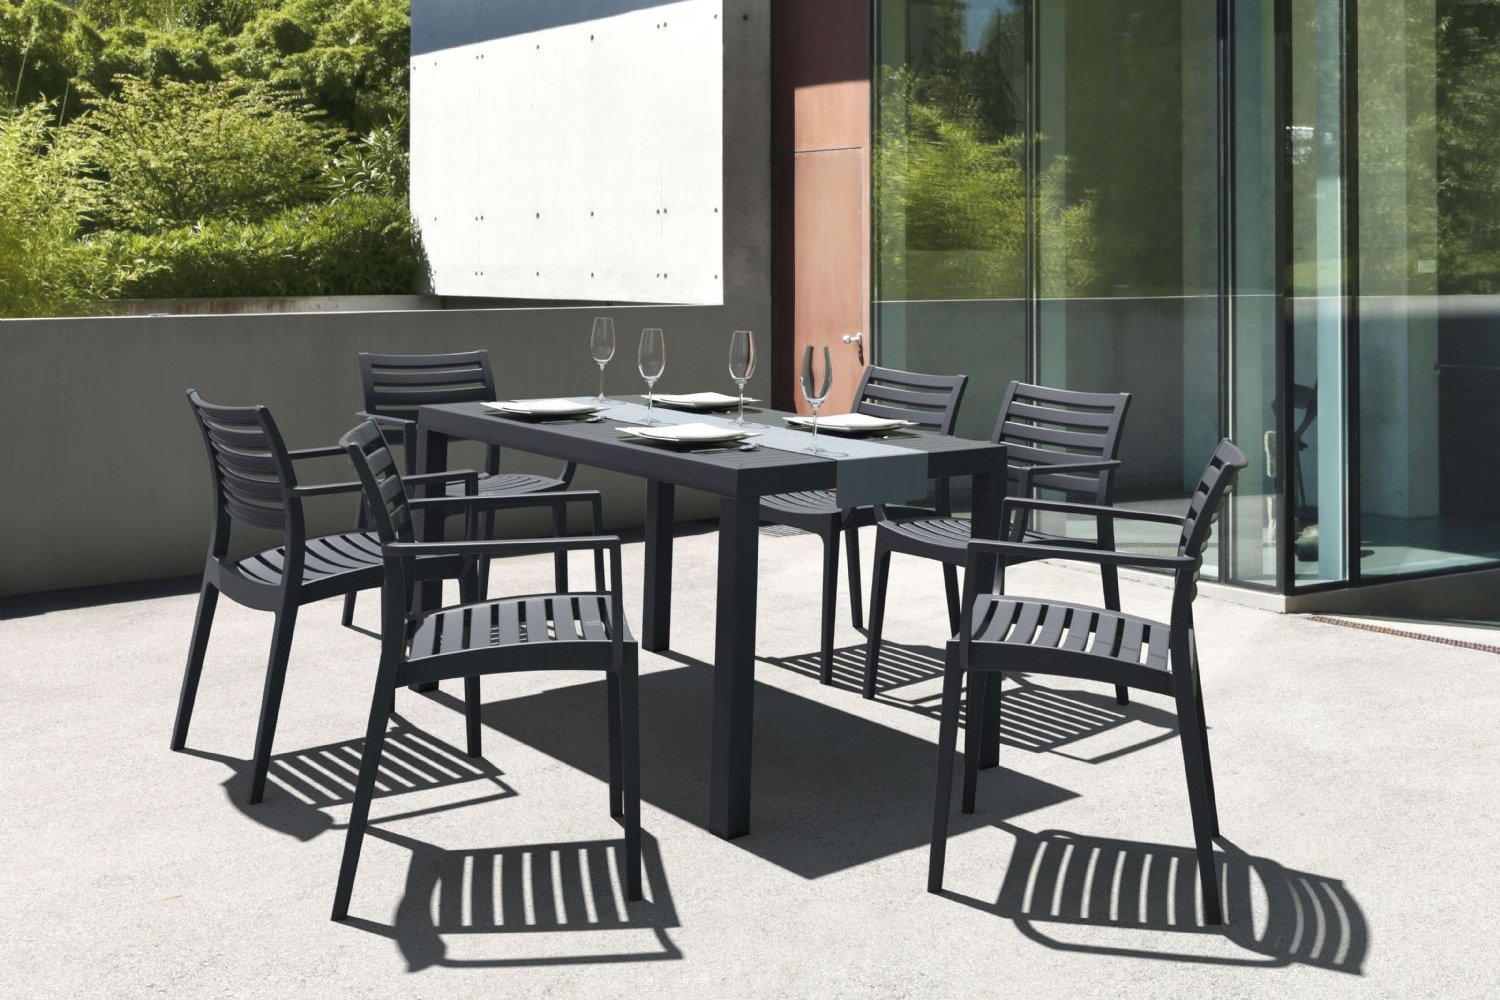 Artemis Resin Rectangle Outdoor Dining Set 7 Piece with Arm Chairs Brown ISP1862S-BRW - 5